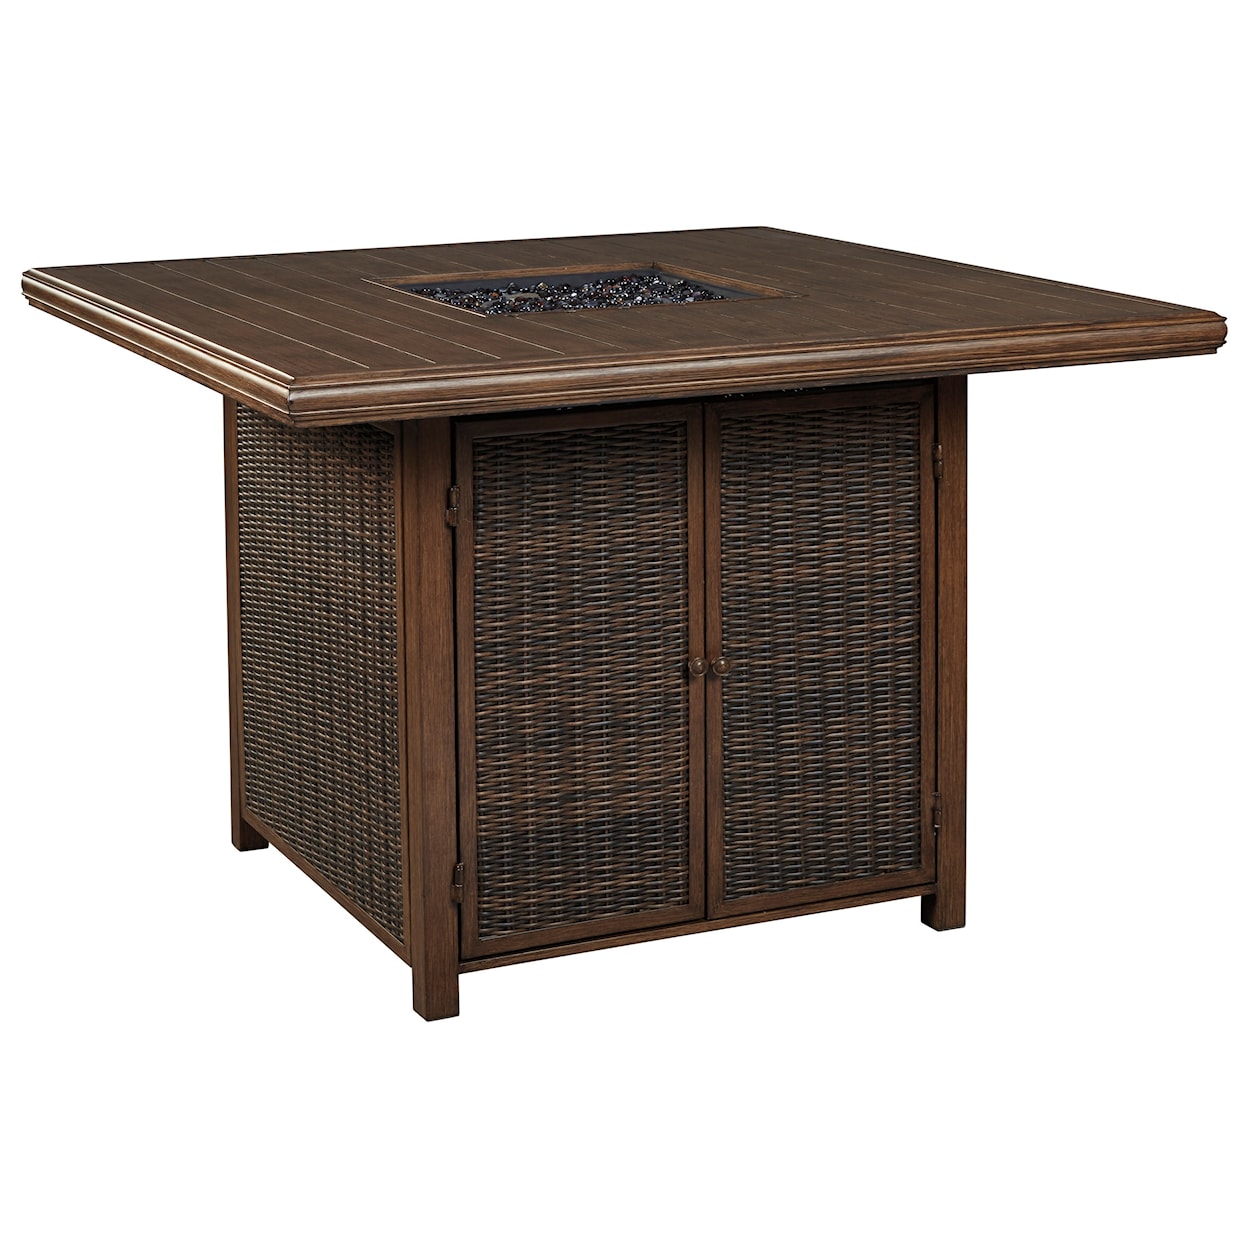 Ashley Furniture Signature Design Paradise Trail Square Bar Table with Fire Pit